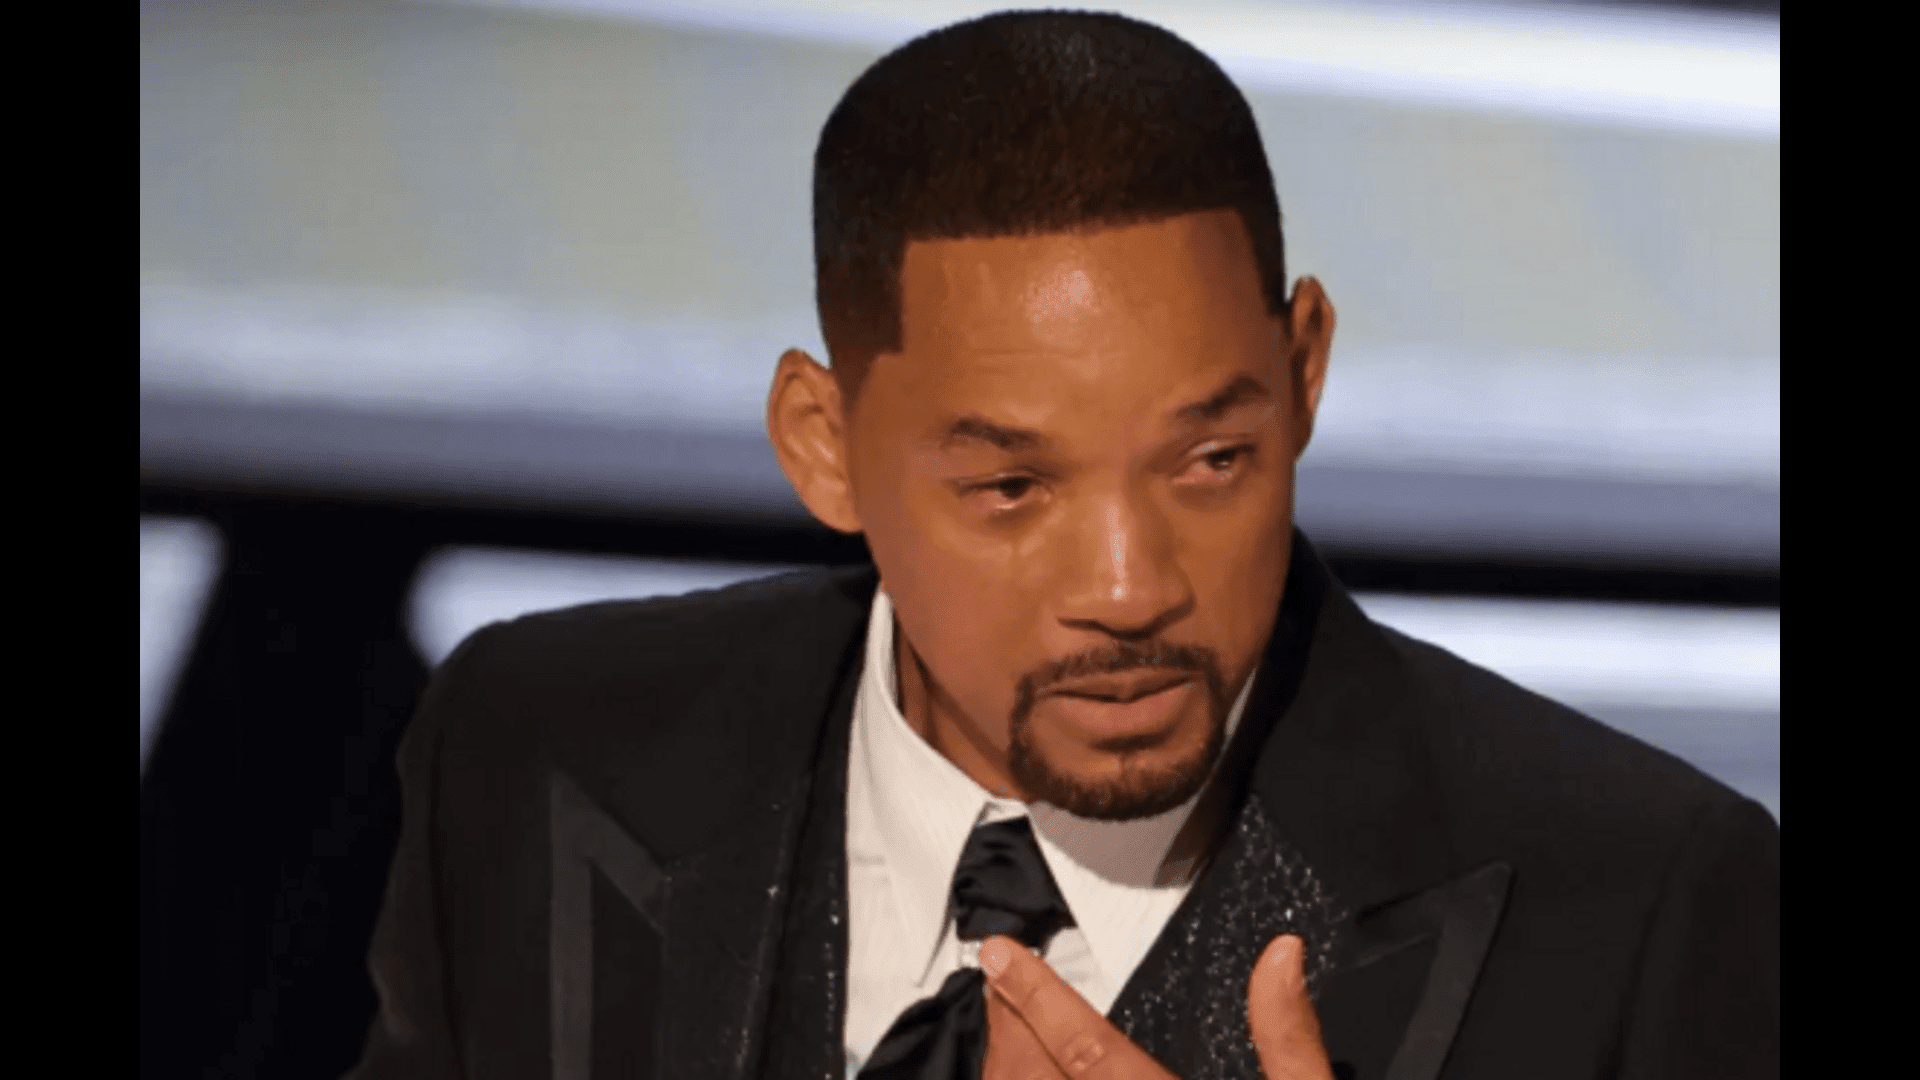 will-smith-responded-to-a-10-year-ban-from-the-academy-after-the-oscar-slap